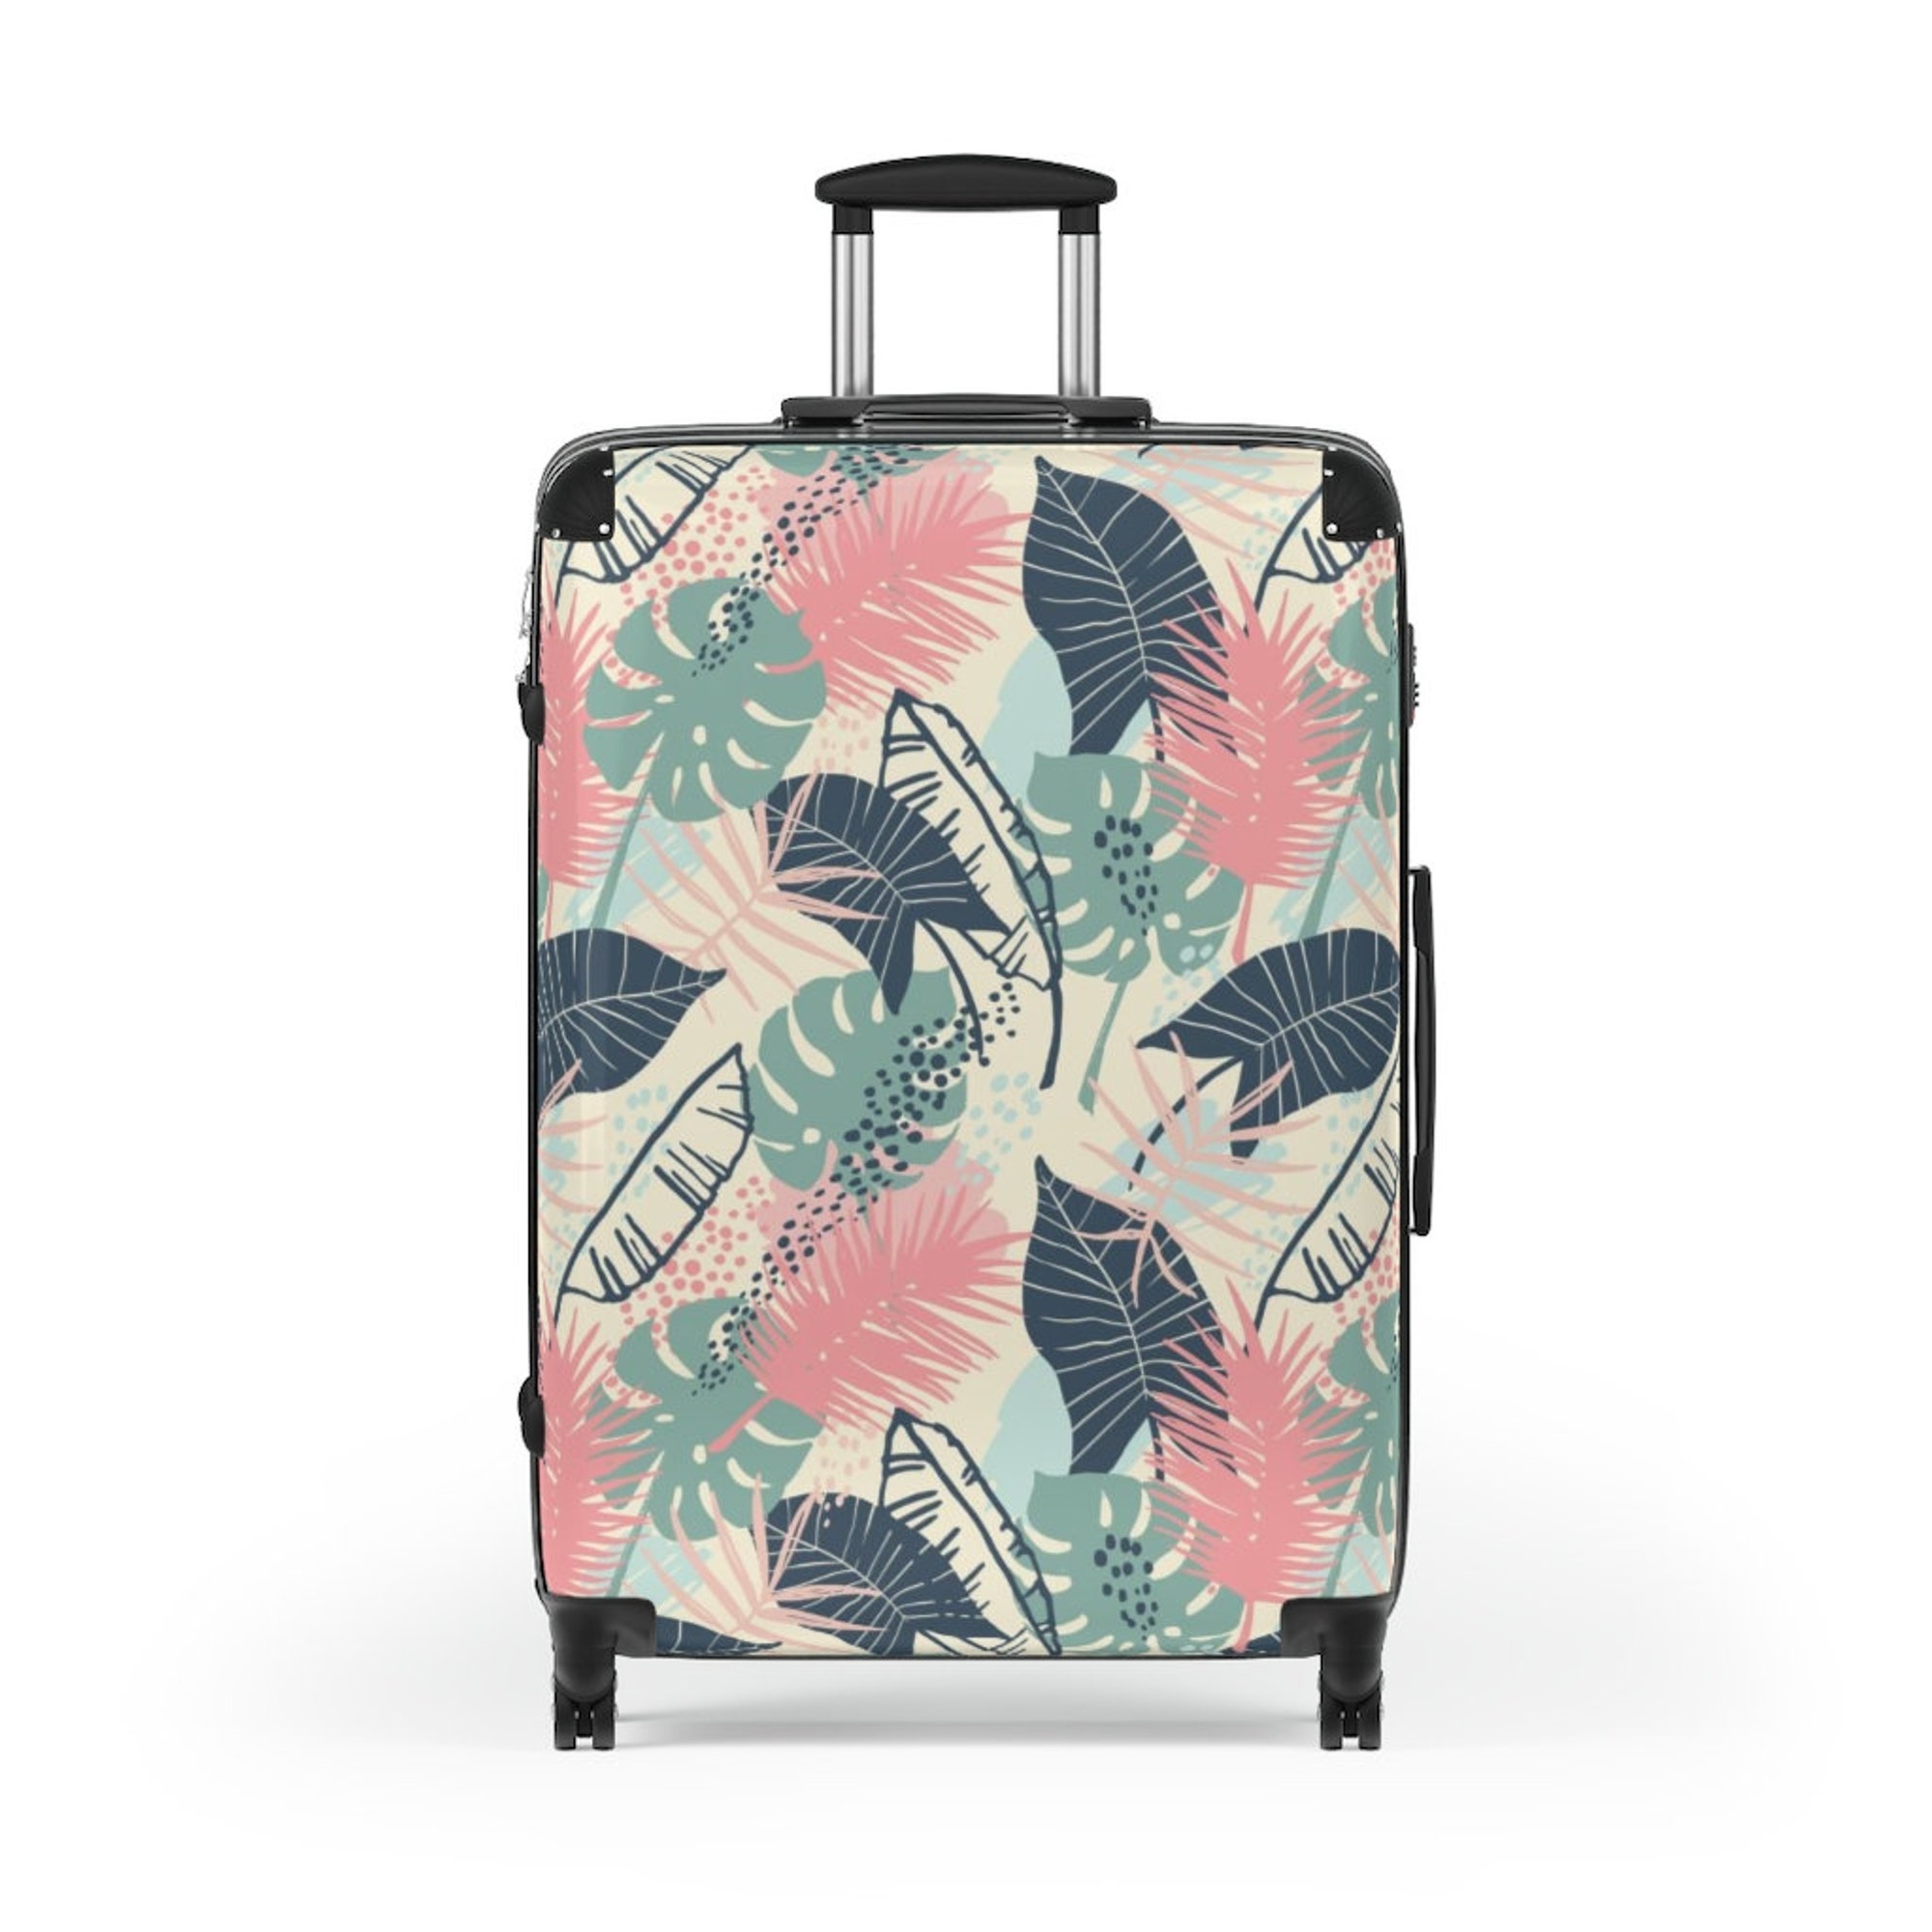 Discover The Raeni Suitcase